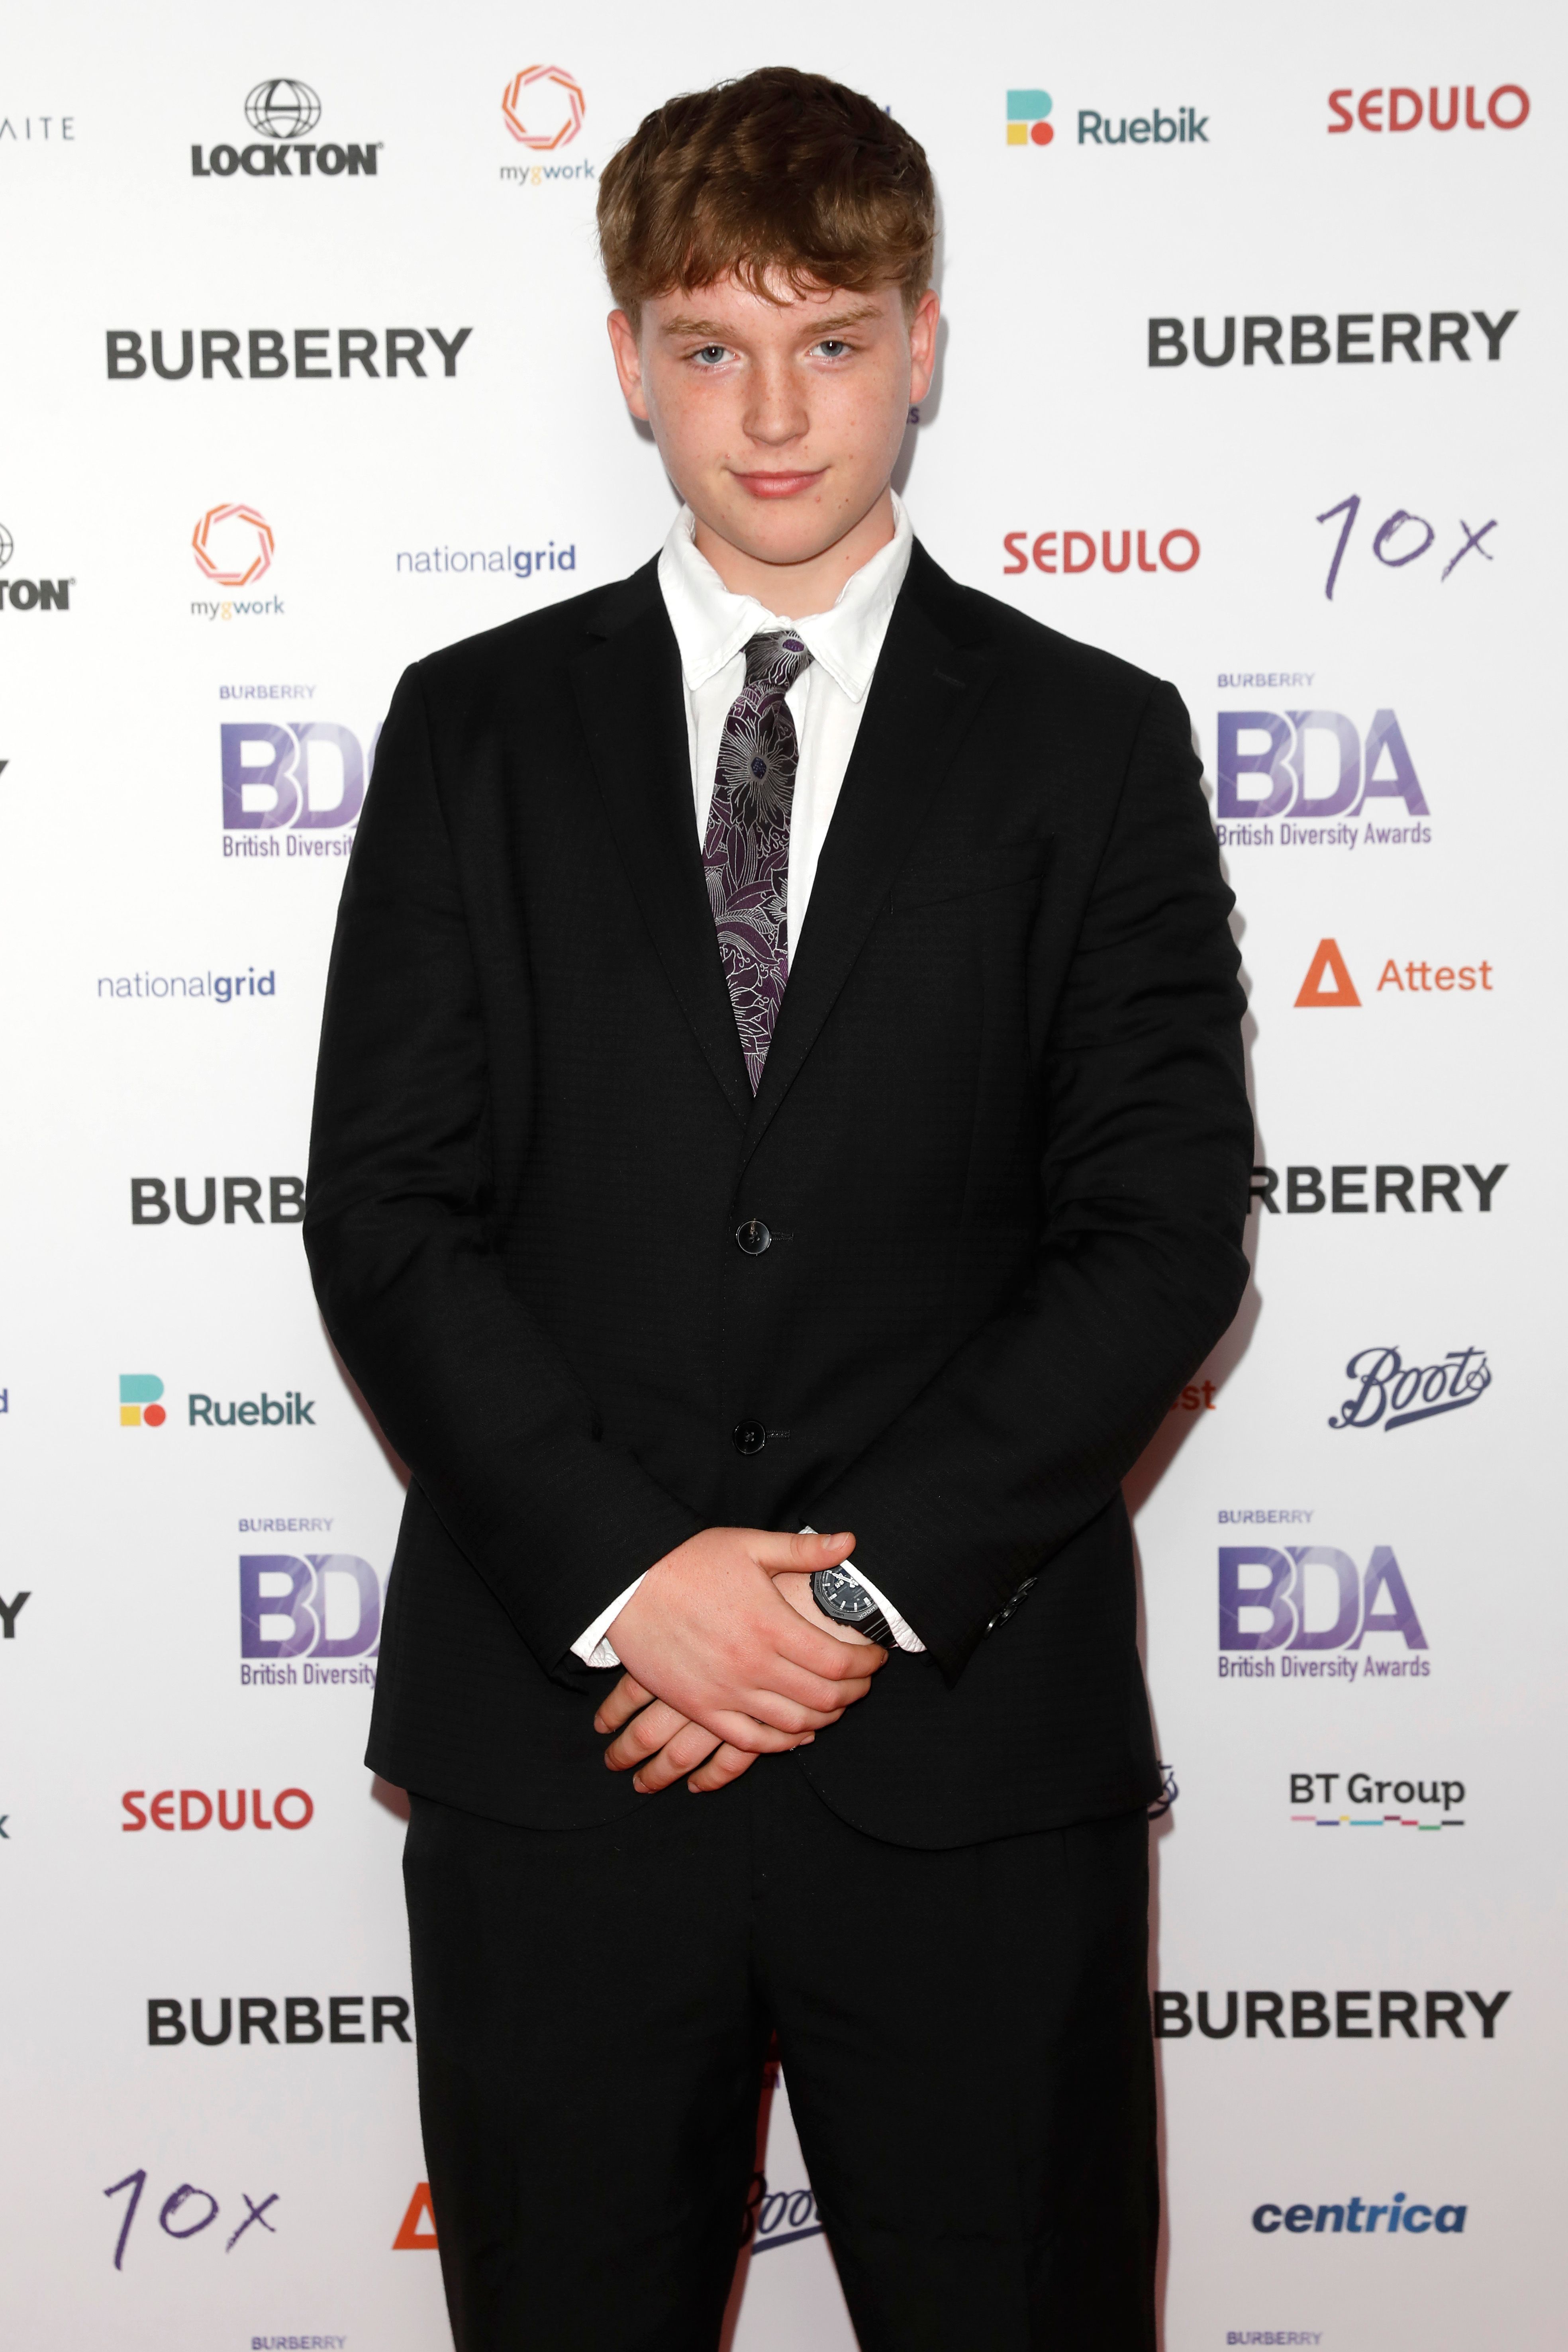 Cormac Hyde-Corrin attends The British Diversity Awards 2023 at Grosvenor House on March 22, 2023, in London, England. | Source: Getty Images